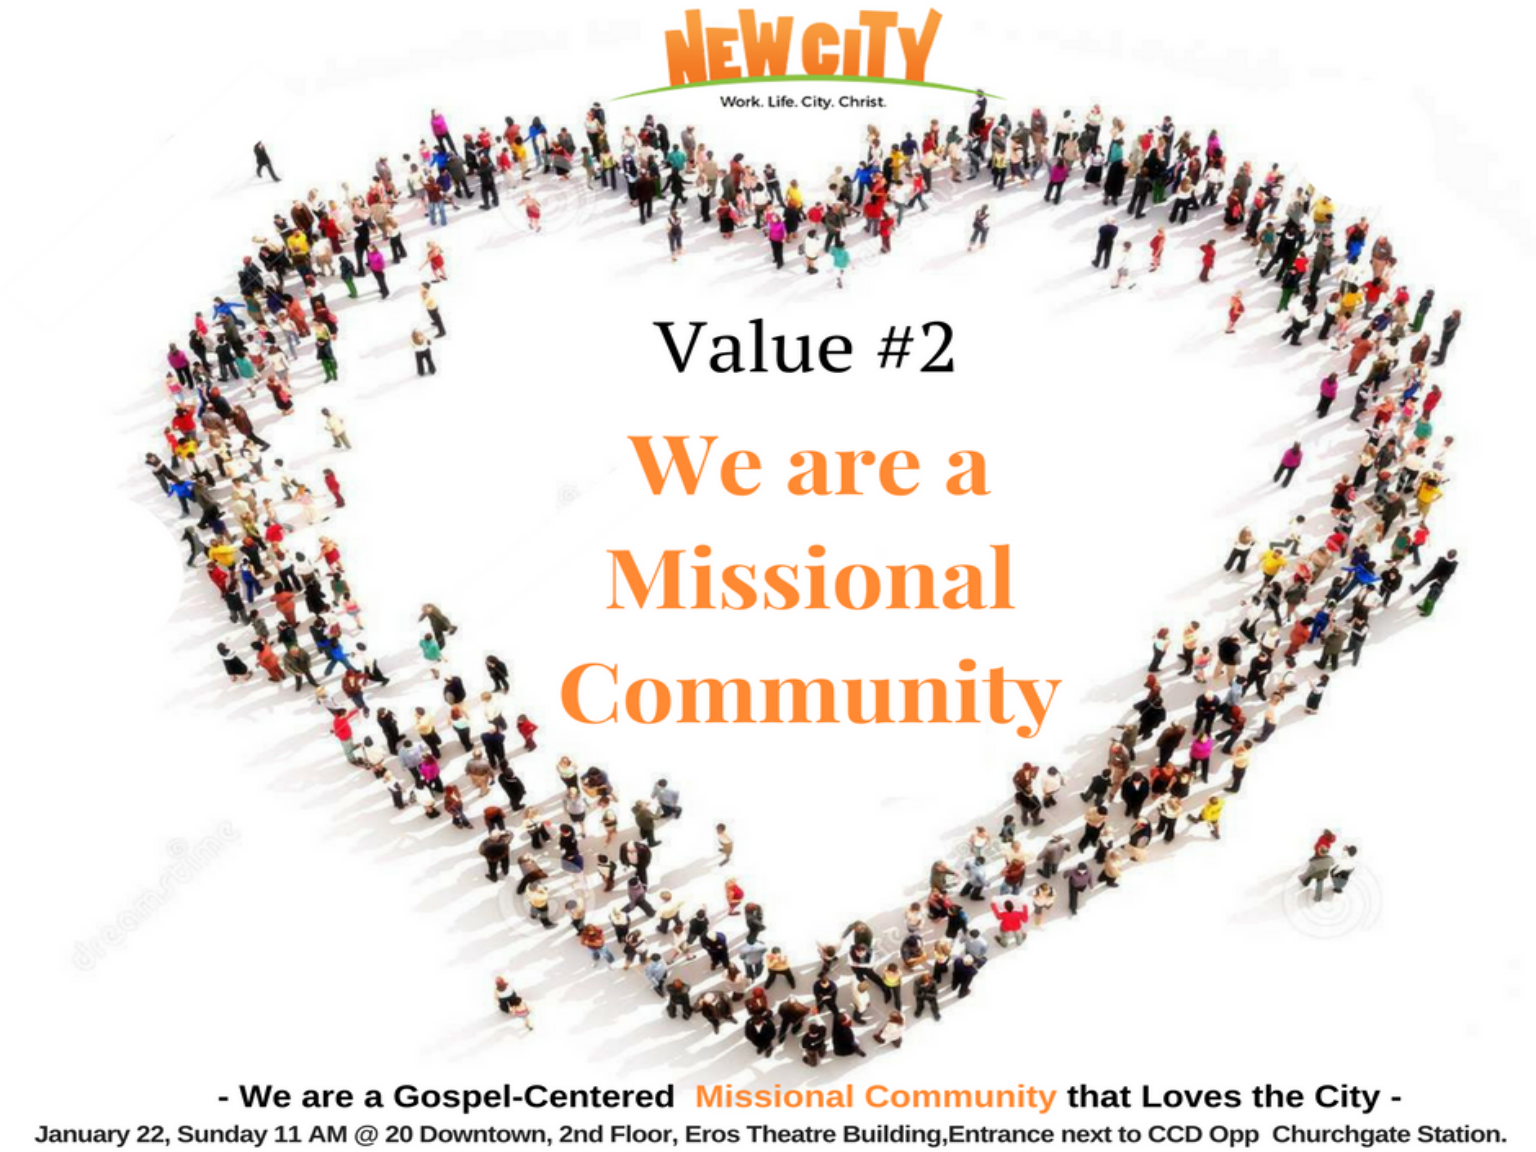 We are Missional Community (Part 1)